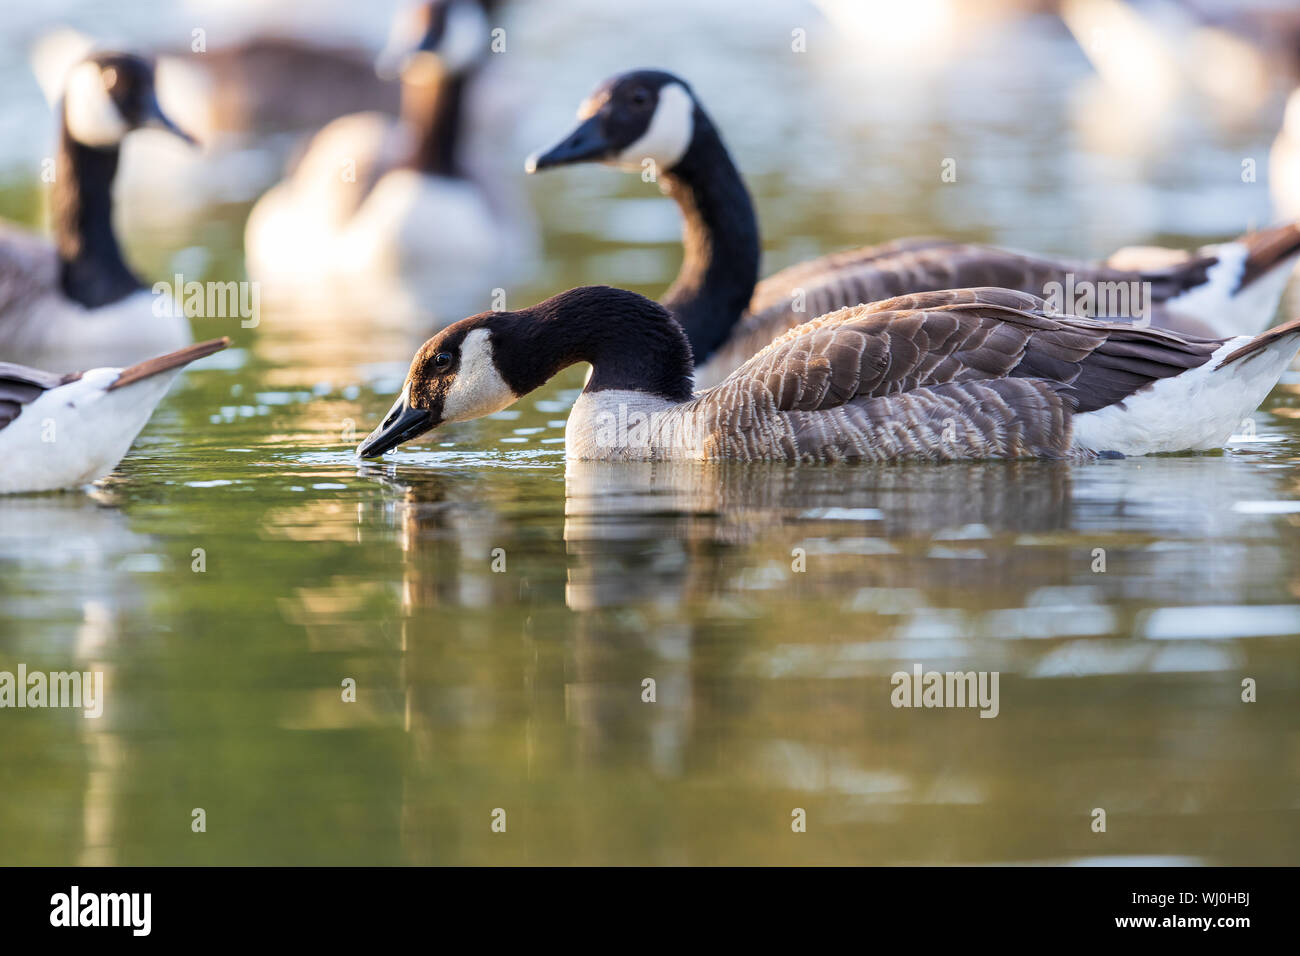 Closeup of Group of Canada geese Branta canadensis swimming on lake Stock Photo